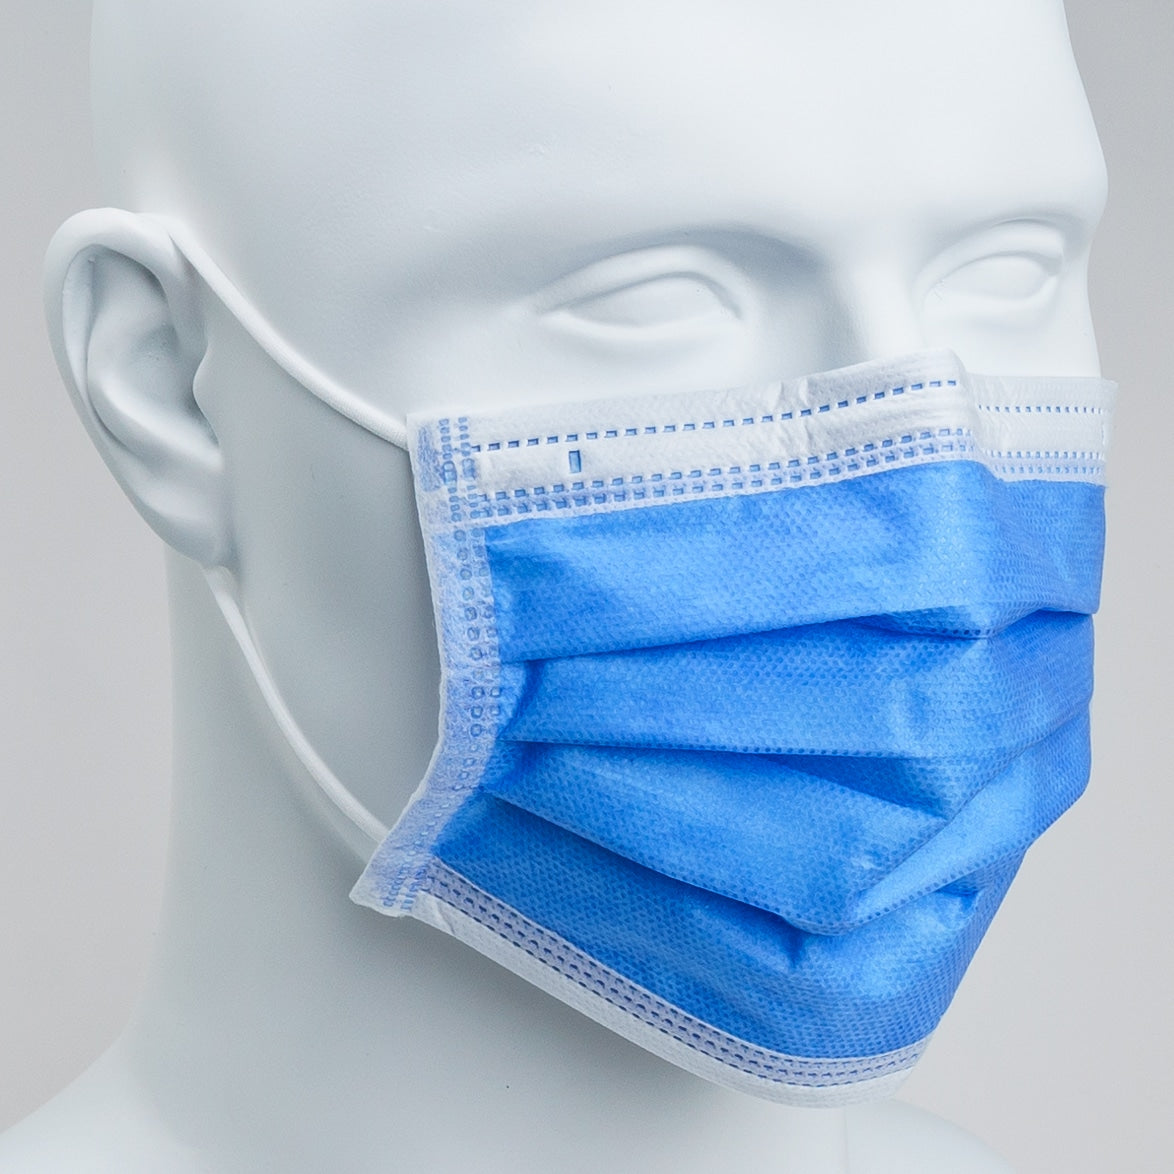 4 Layers of Protection - Integrum Medical Masks ASTM Level 3 Mask 4-Ply (FDA Compliant)-eSafety Supplies, Inc